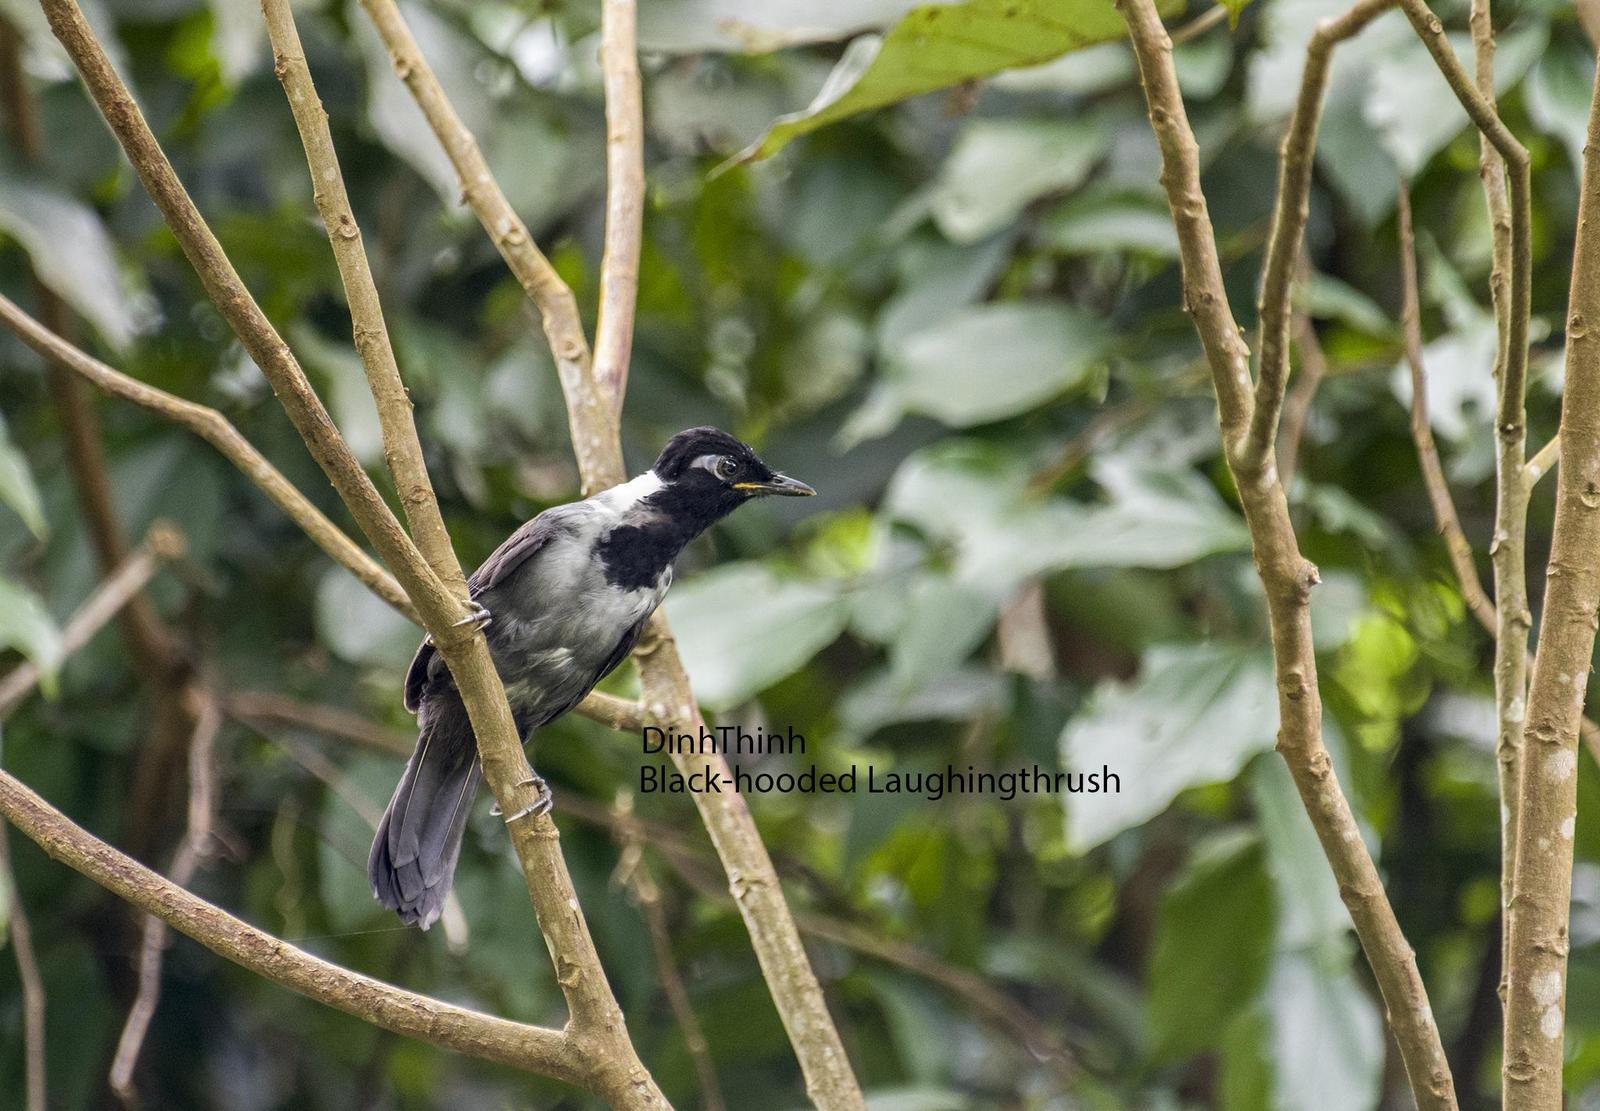 Black-hooded Laughingthrush Photo by Dinh Thinh